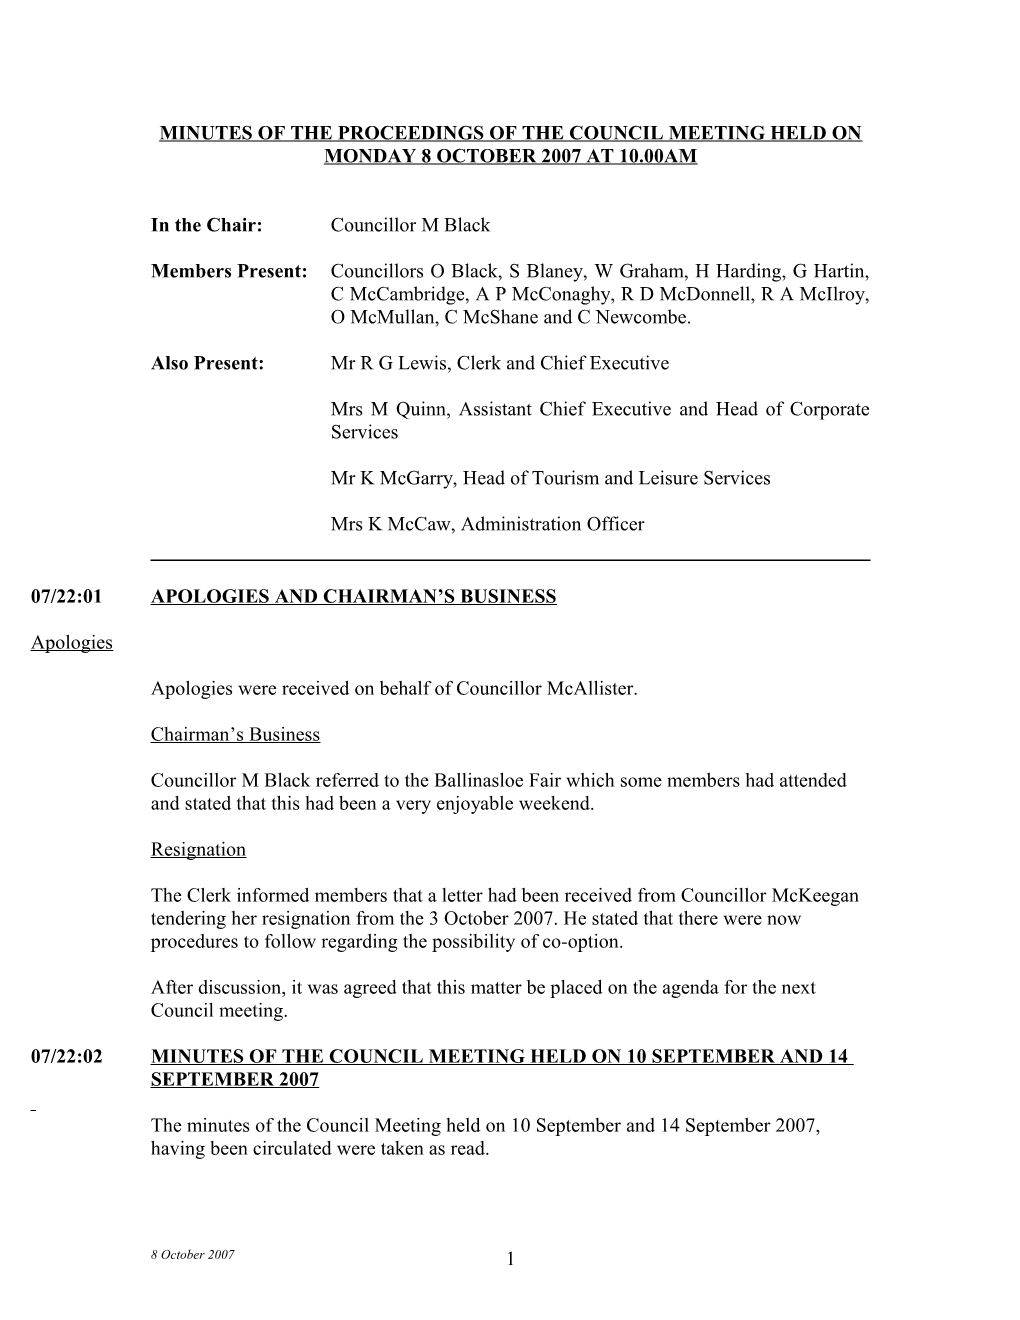 Minutes of the Proceedings of the Council Meeting Held on Monday 8 October 2007 at 10